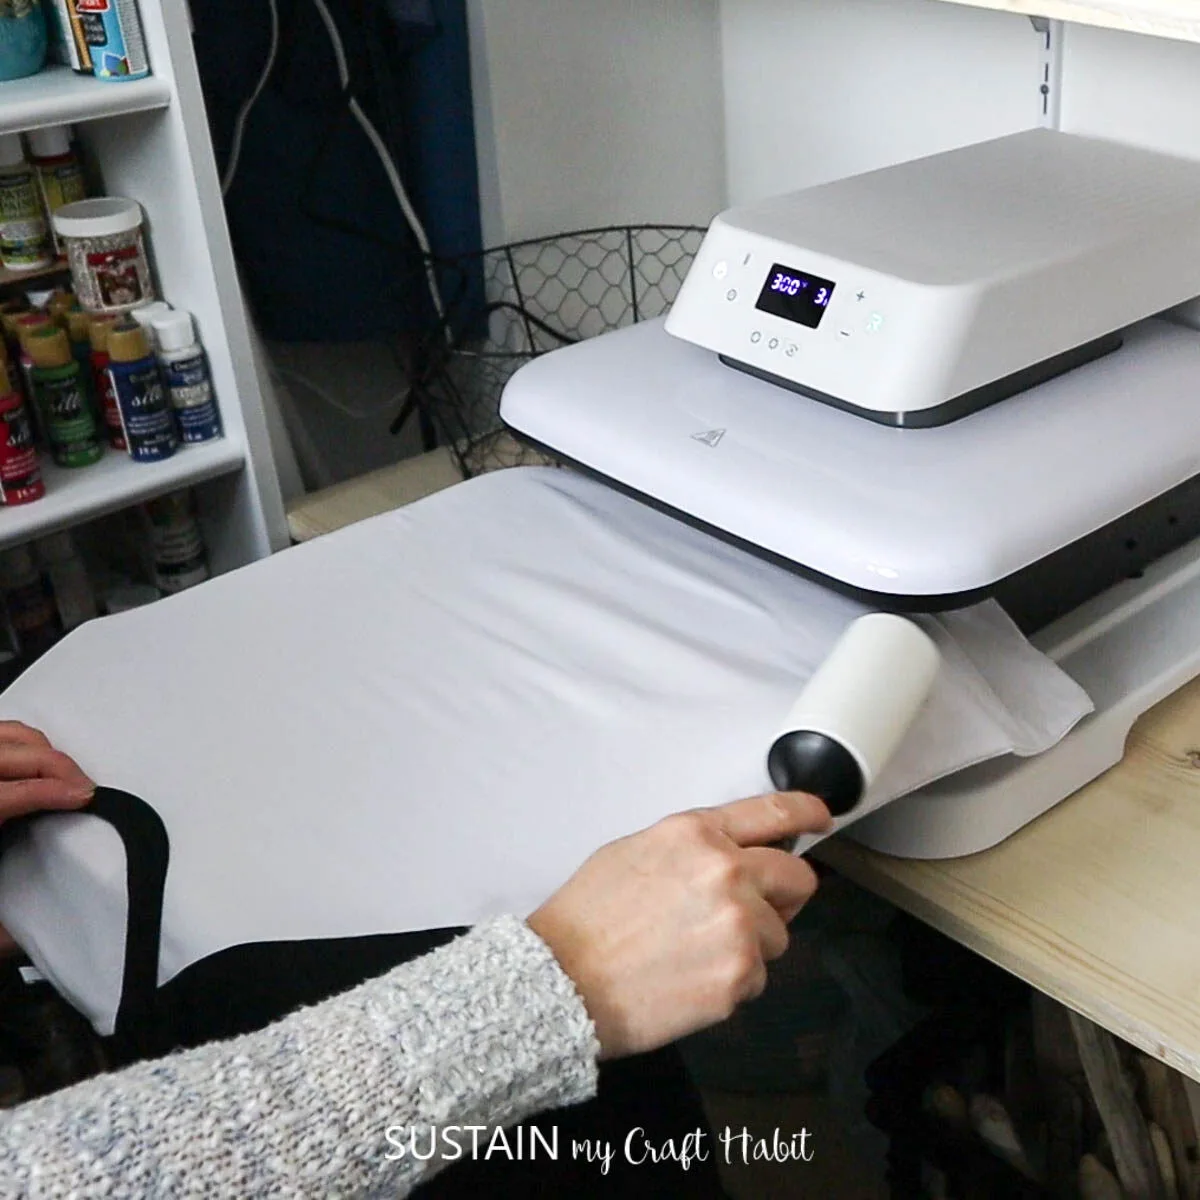 HTVRONT Auto Heat Press Review + Setup - Happiness is Homemade